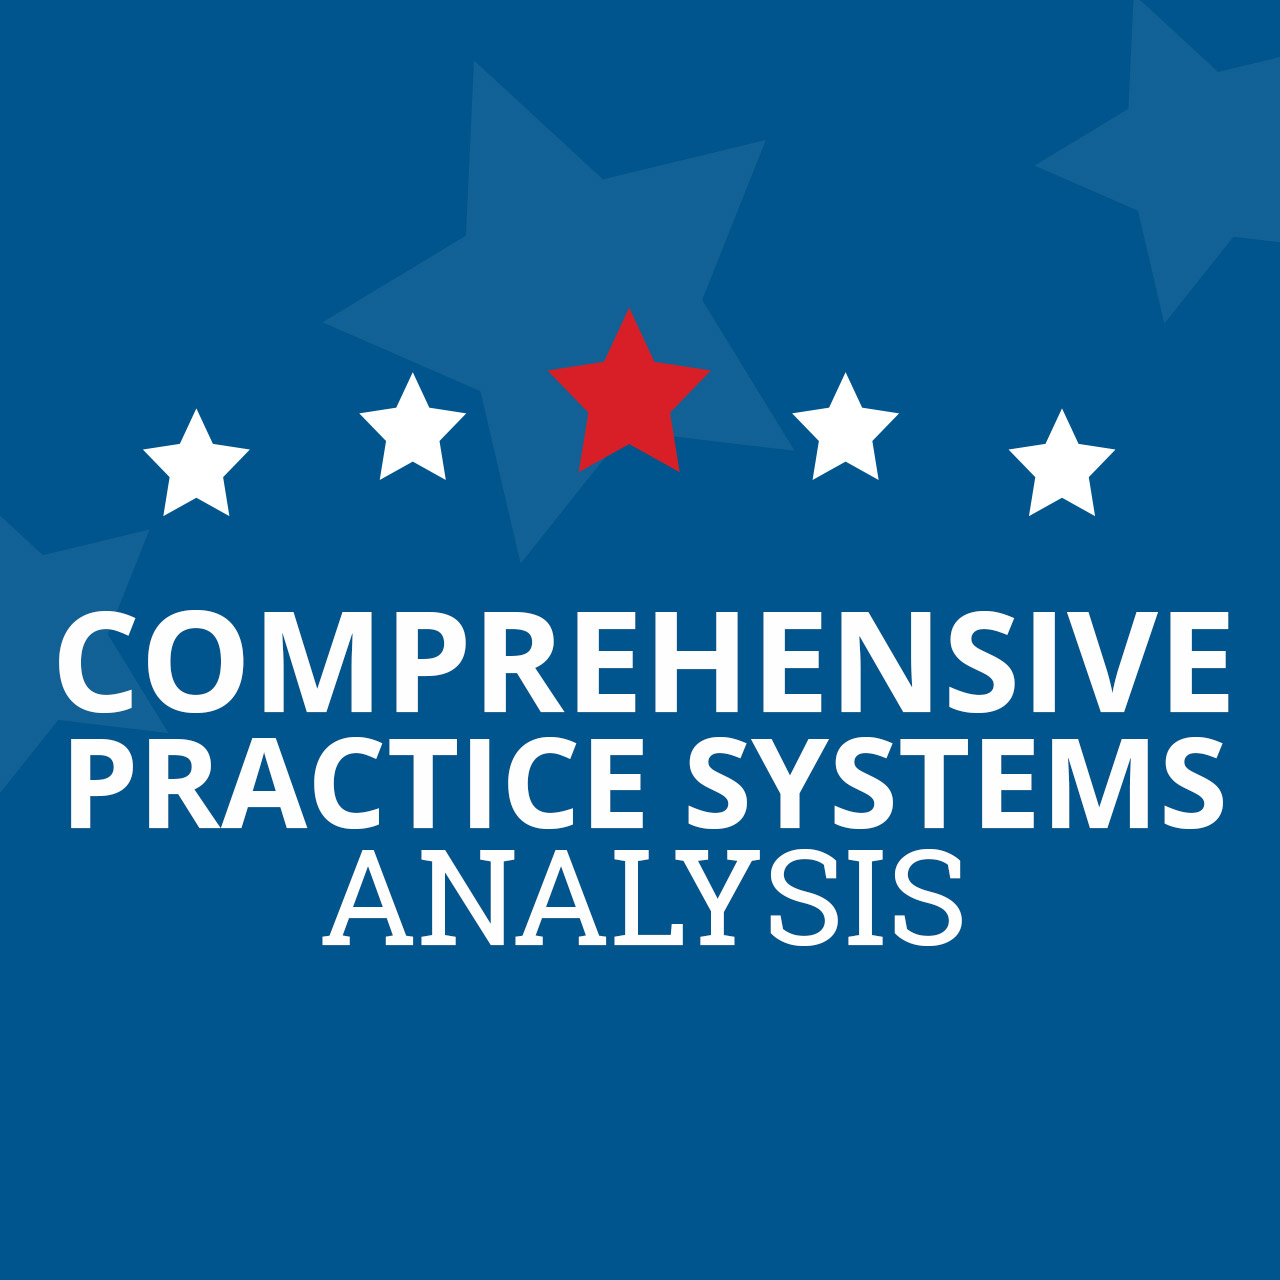 Featured image for “Comprehensive Practice Systems Analysis”